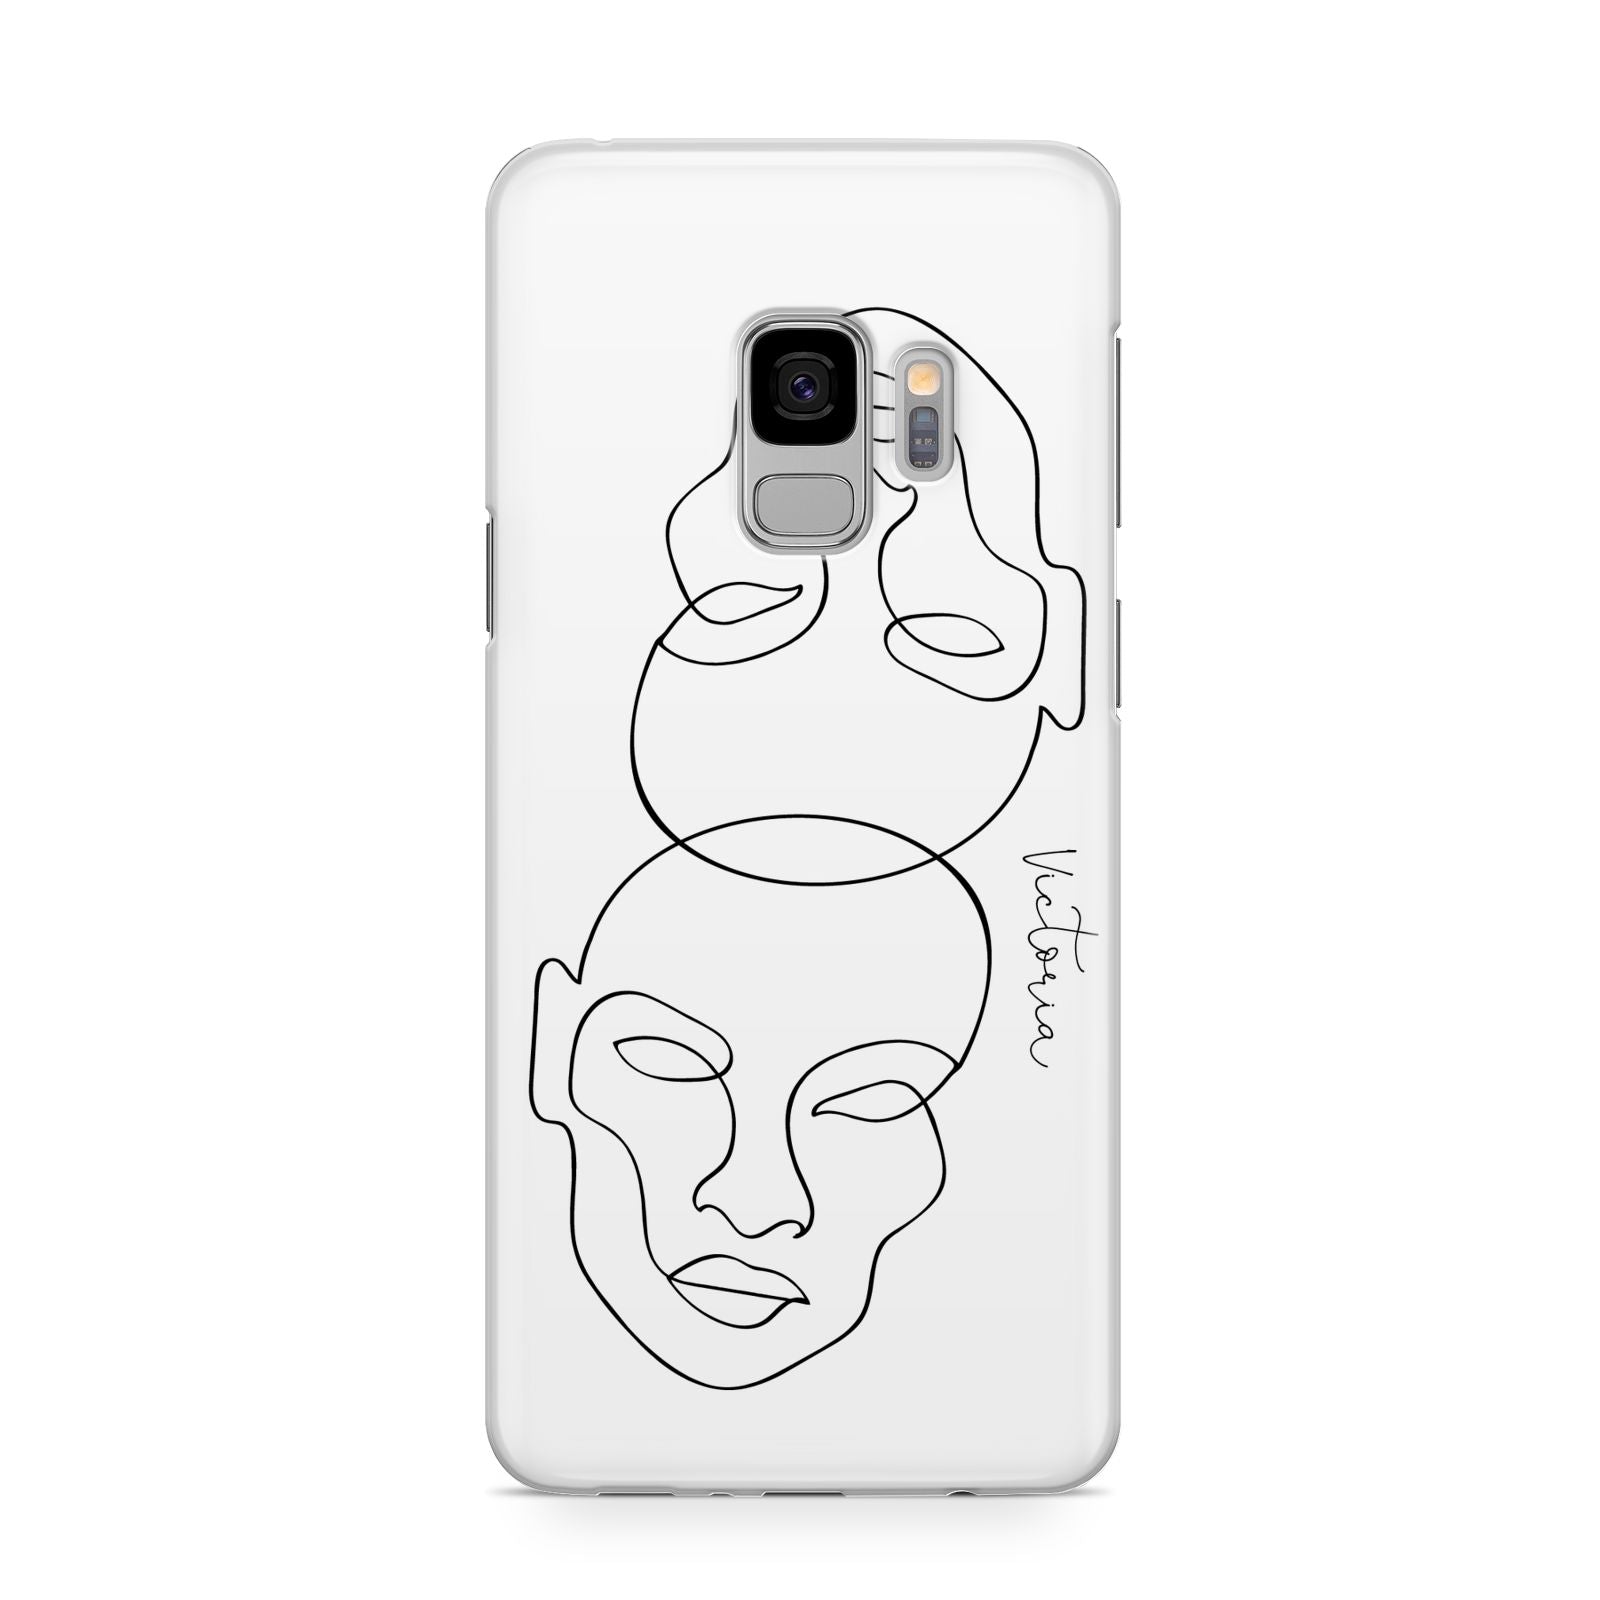 Personalised White Line Art Samsung Galaxy S9 Case